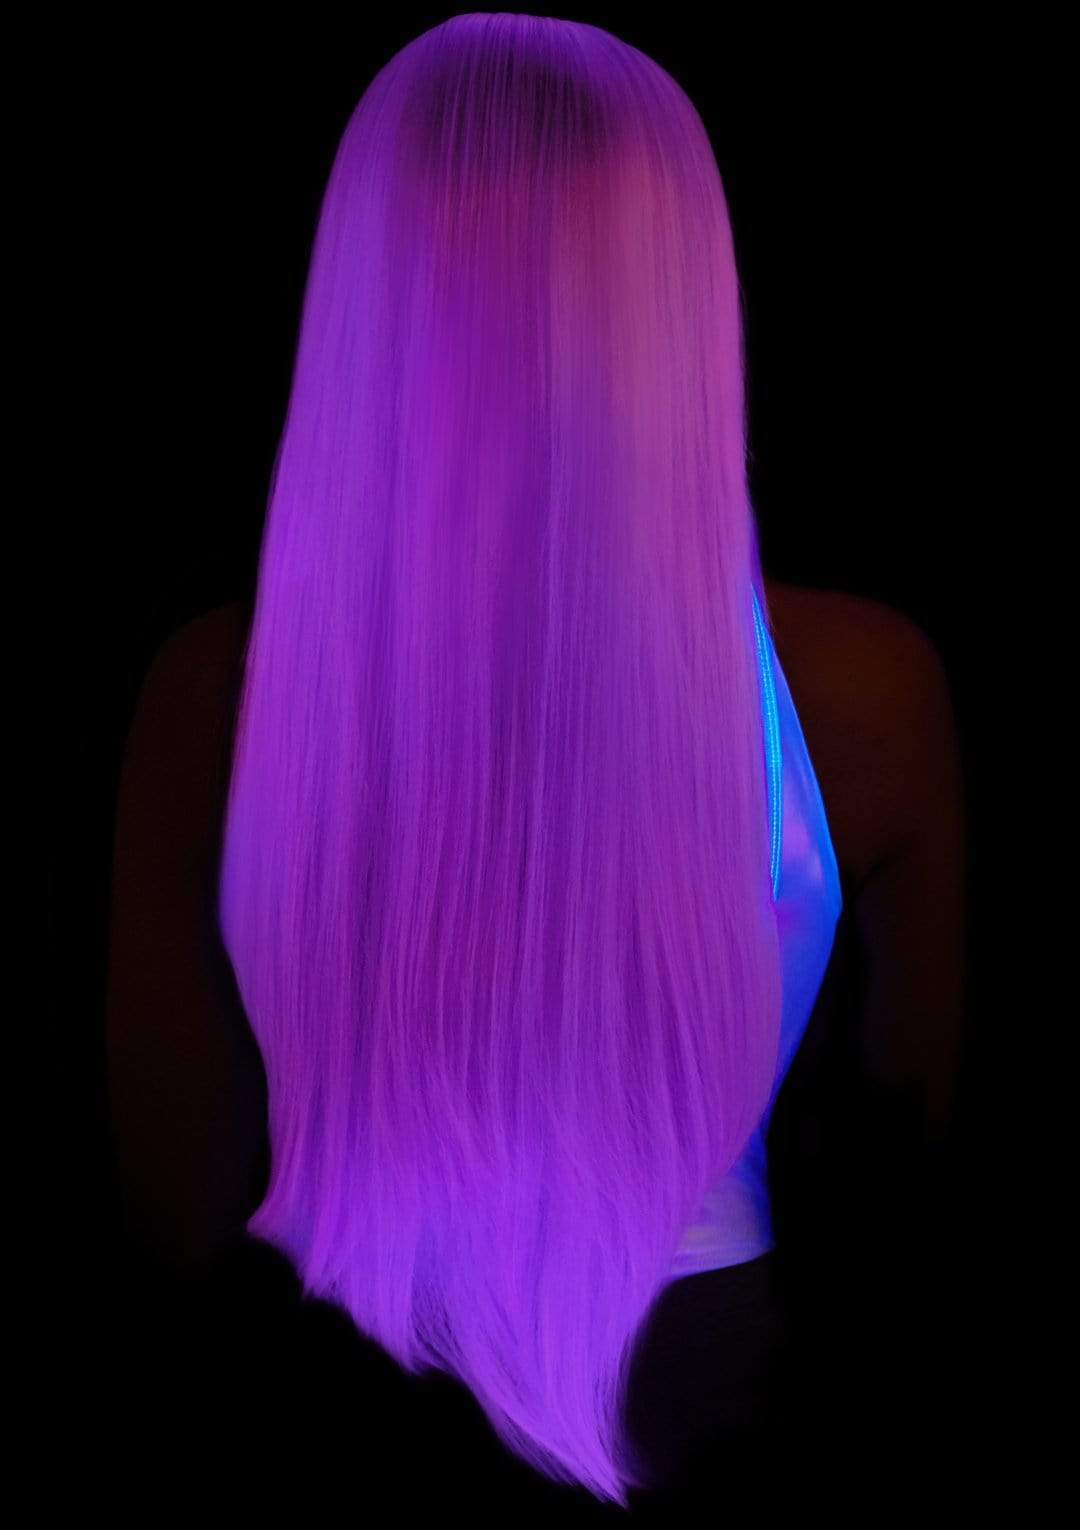 Long Straight Lavender Deluxe Wig